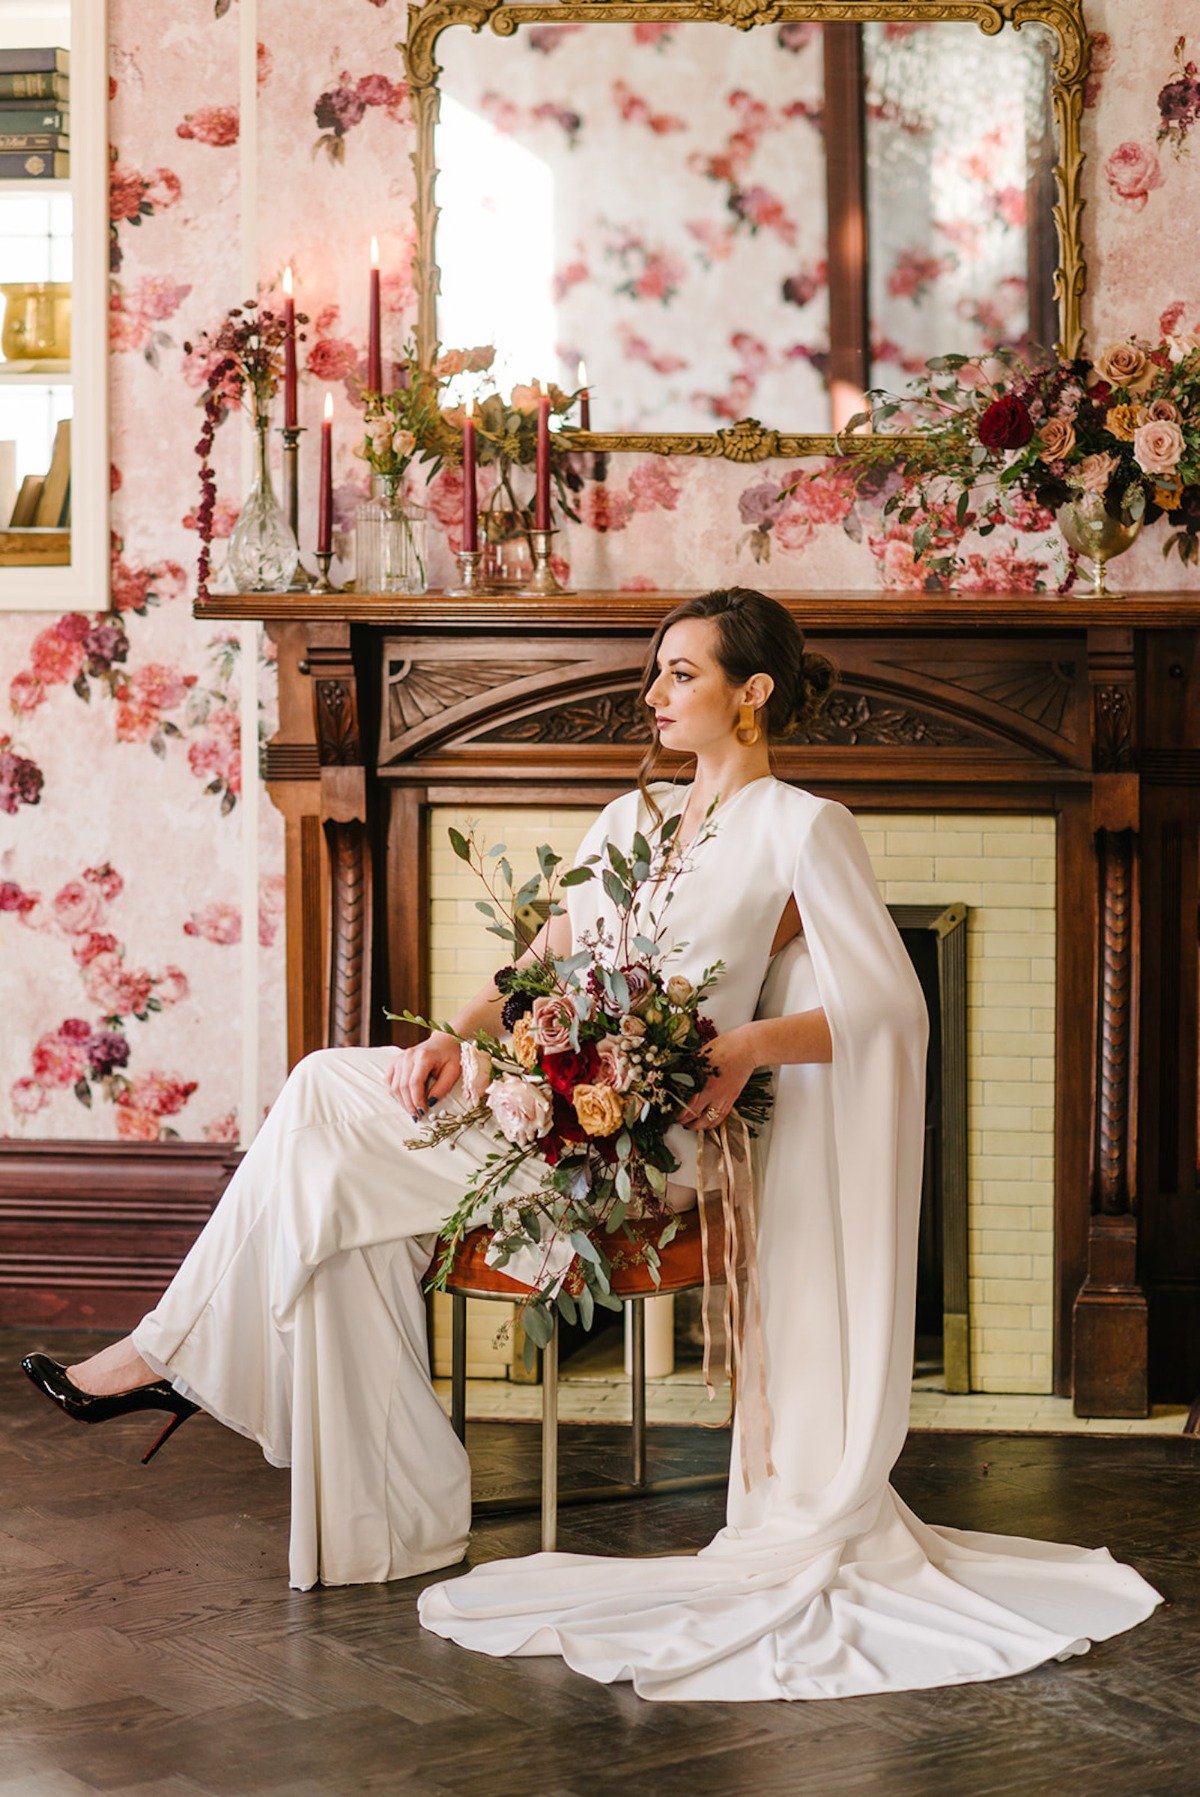 A Wedding Inspo Shoot That's Perfectly Tailored For A #BossBride